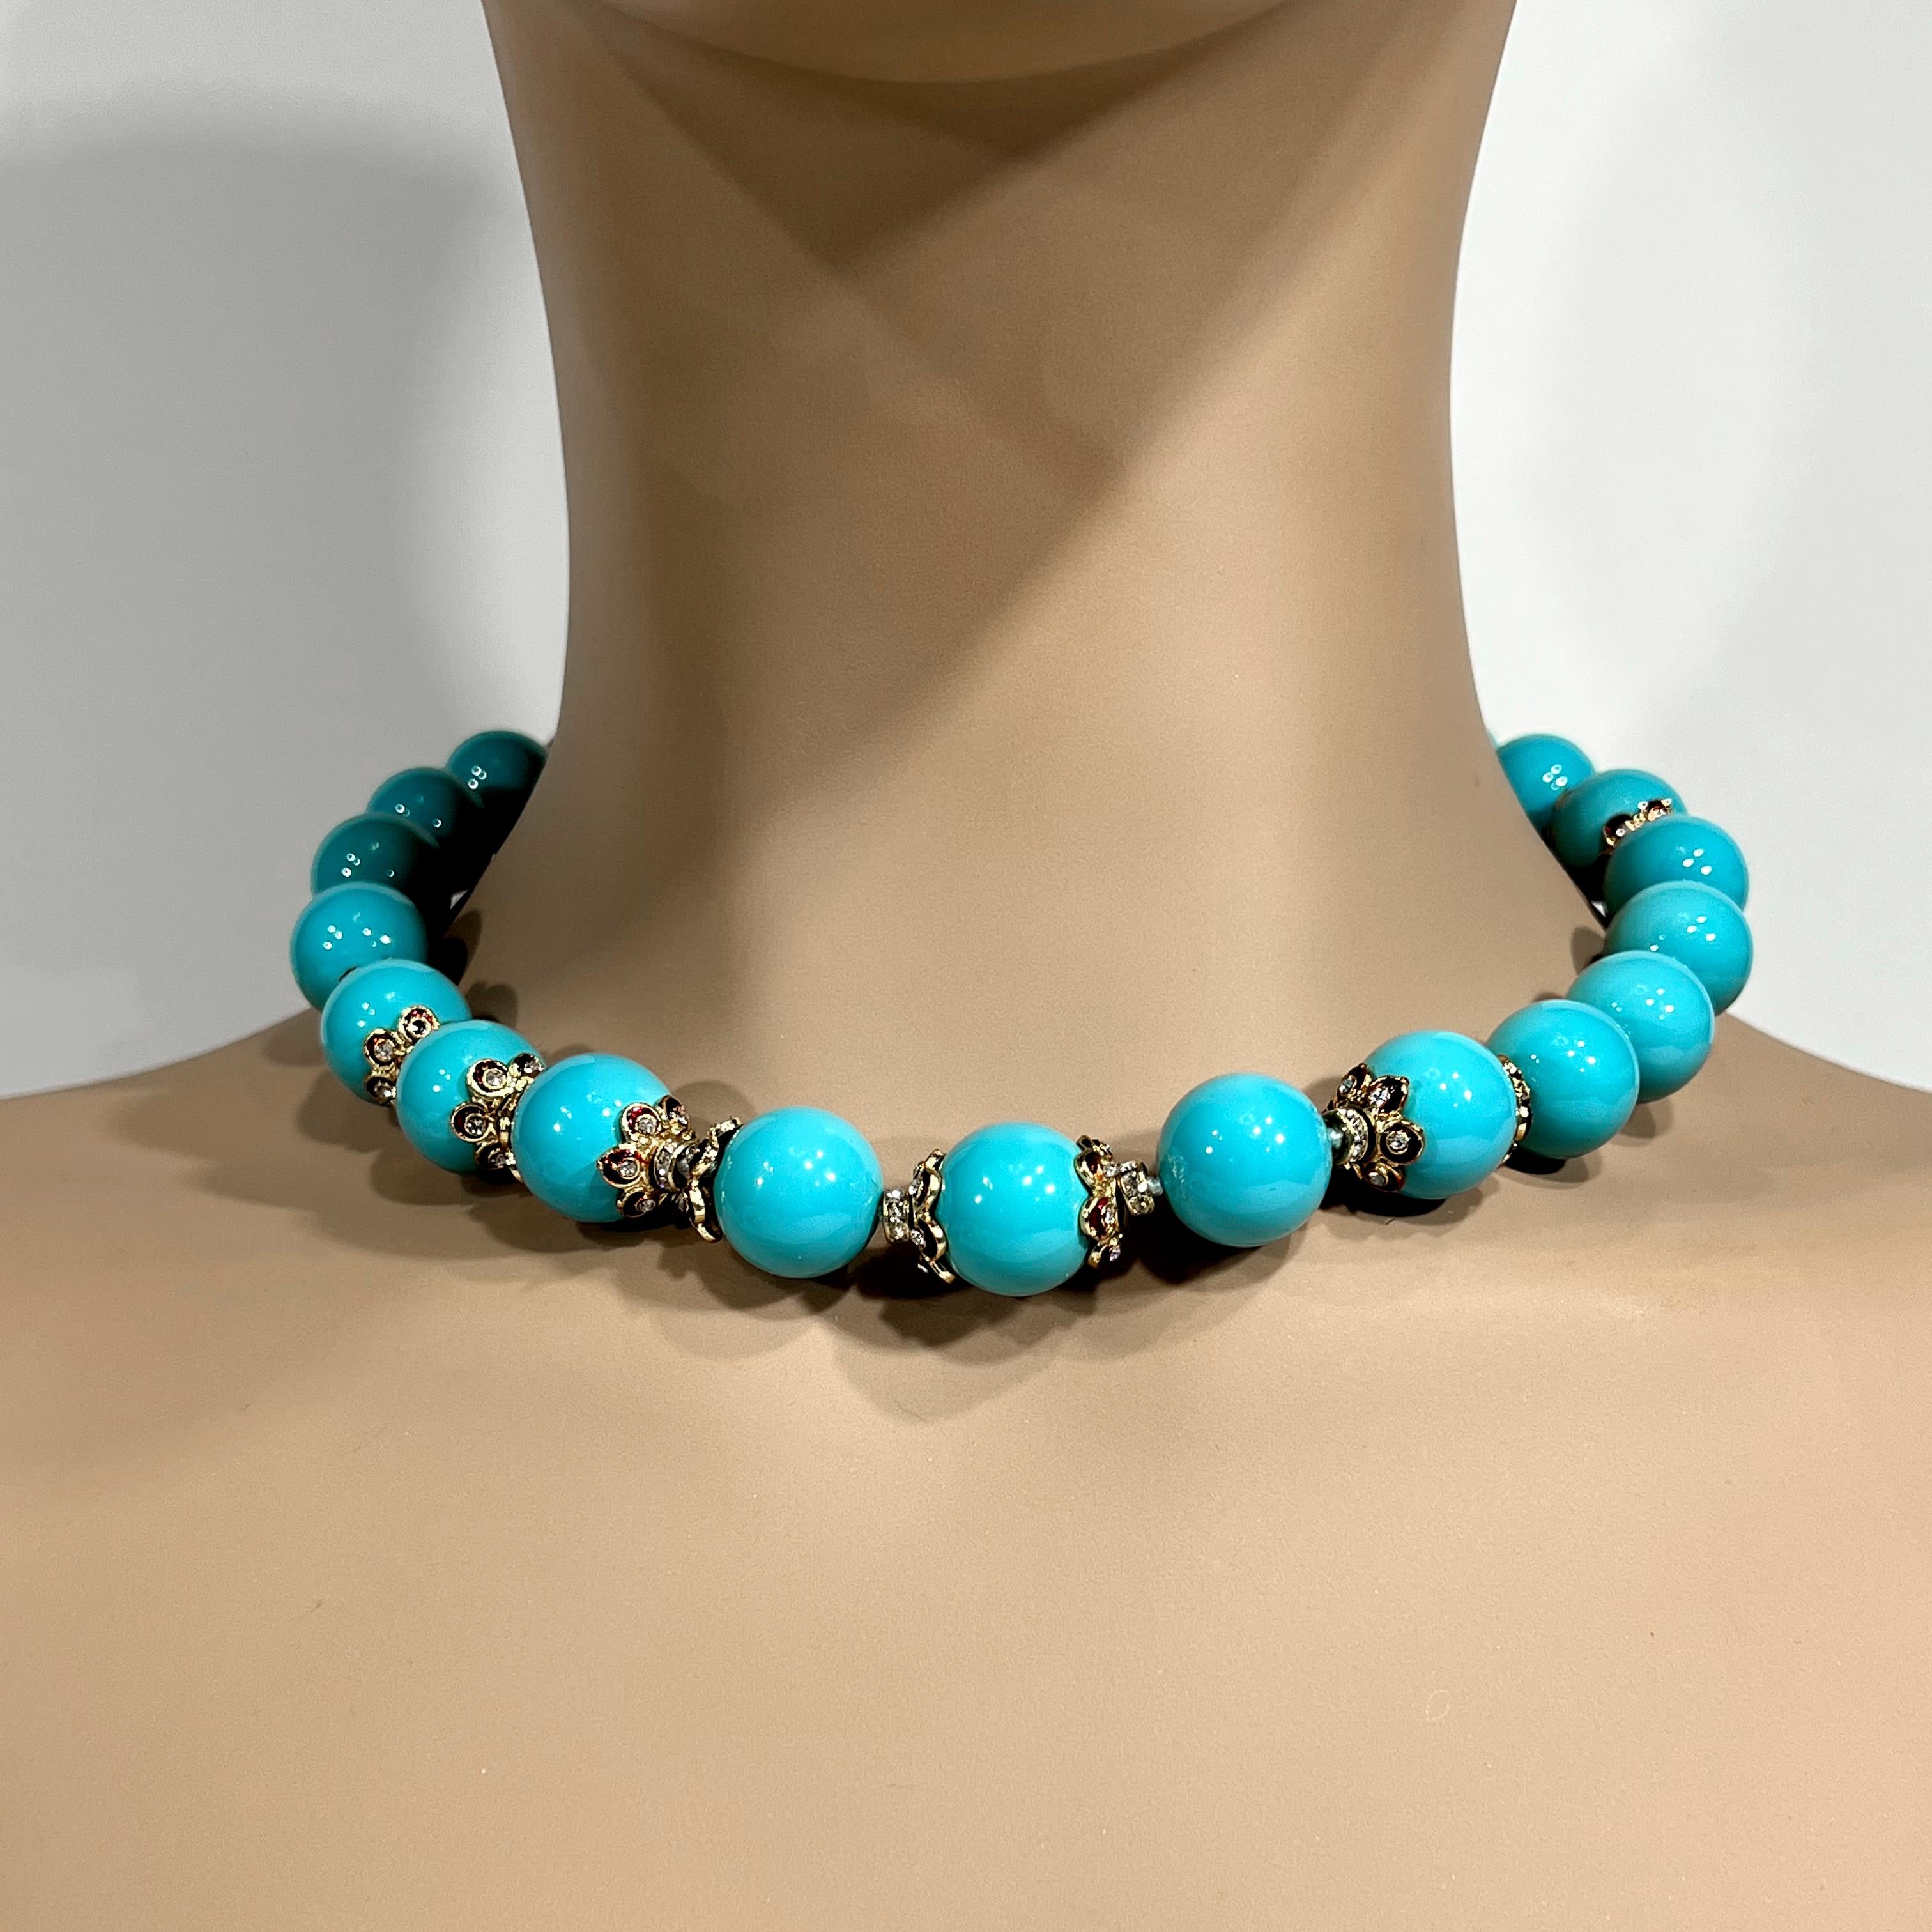 
Our Palm Beach Look collection features an elegant strand of man-made 16mm turquoise beads interspersed with gilt and diamante enamel set rondels made to an 18-inch length silk strung attached to an easy gilt clasp.  Perfect for layering with